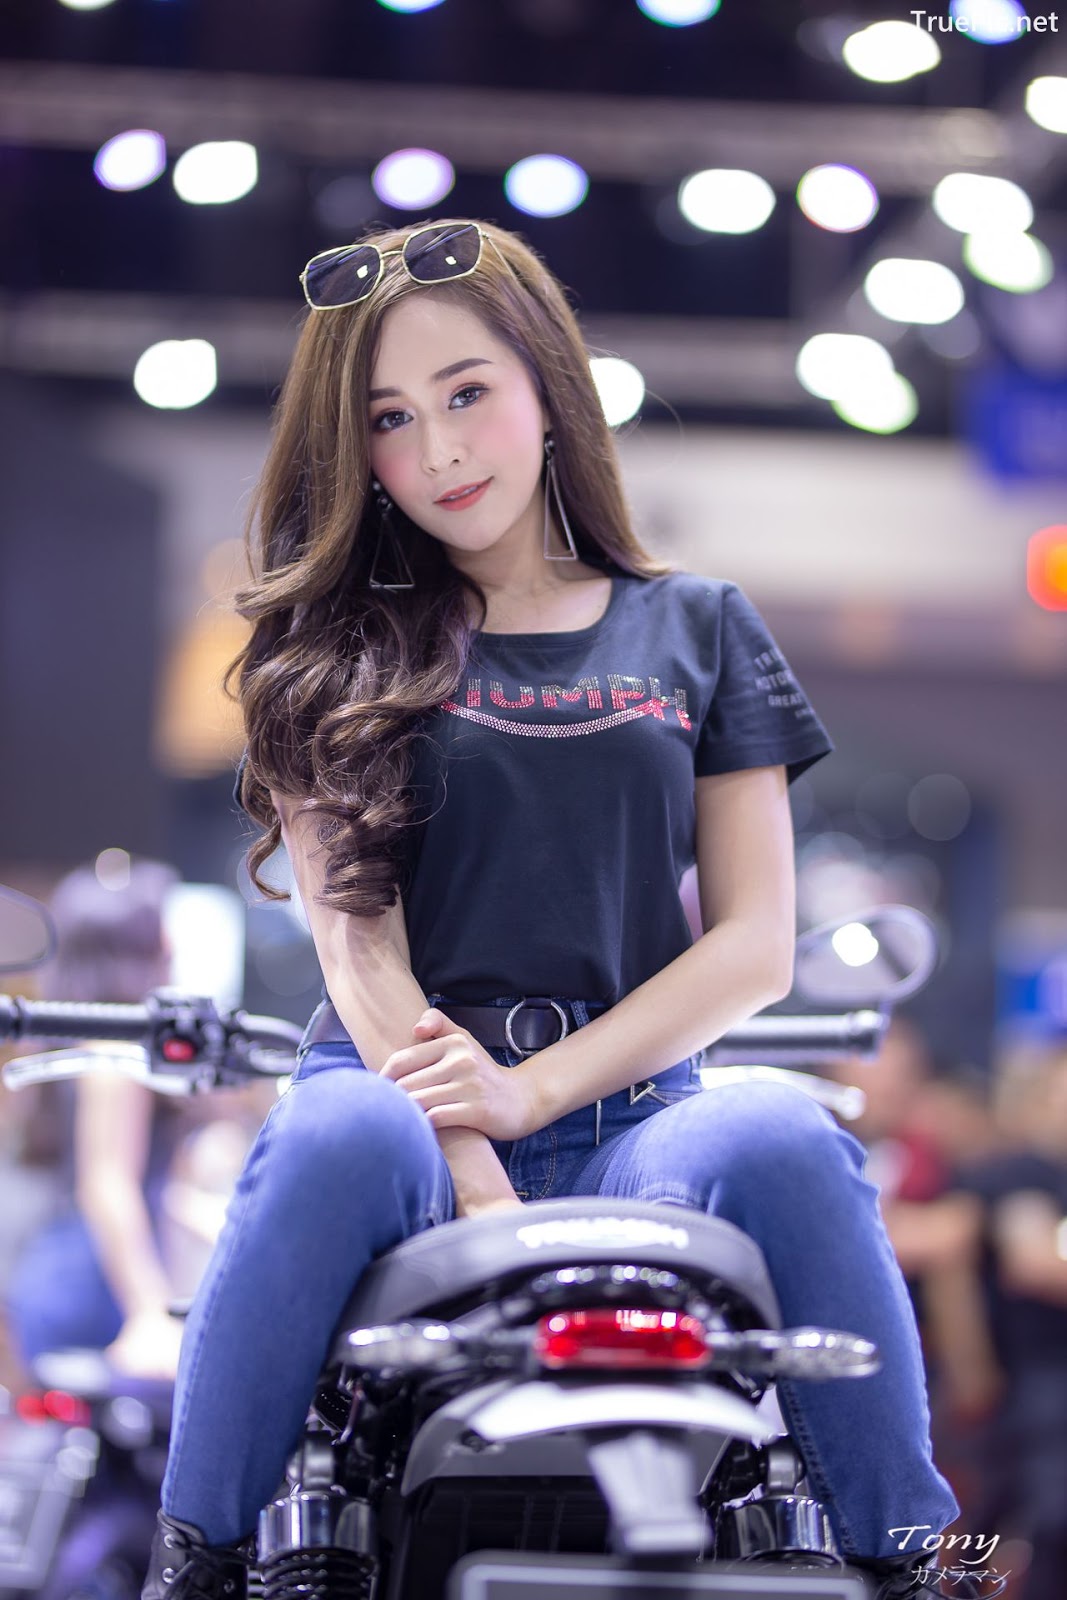 Image-Thailand-Hot-Model-Thai-Racing-Girl-At-Motor-Show-2019-TruePic.net- Picture-97